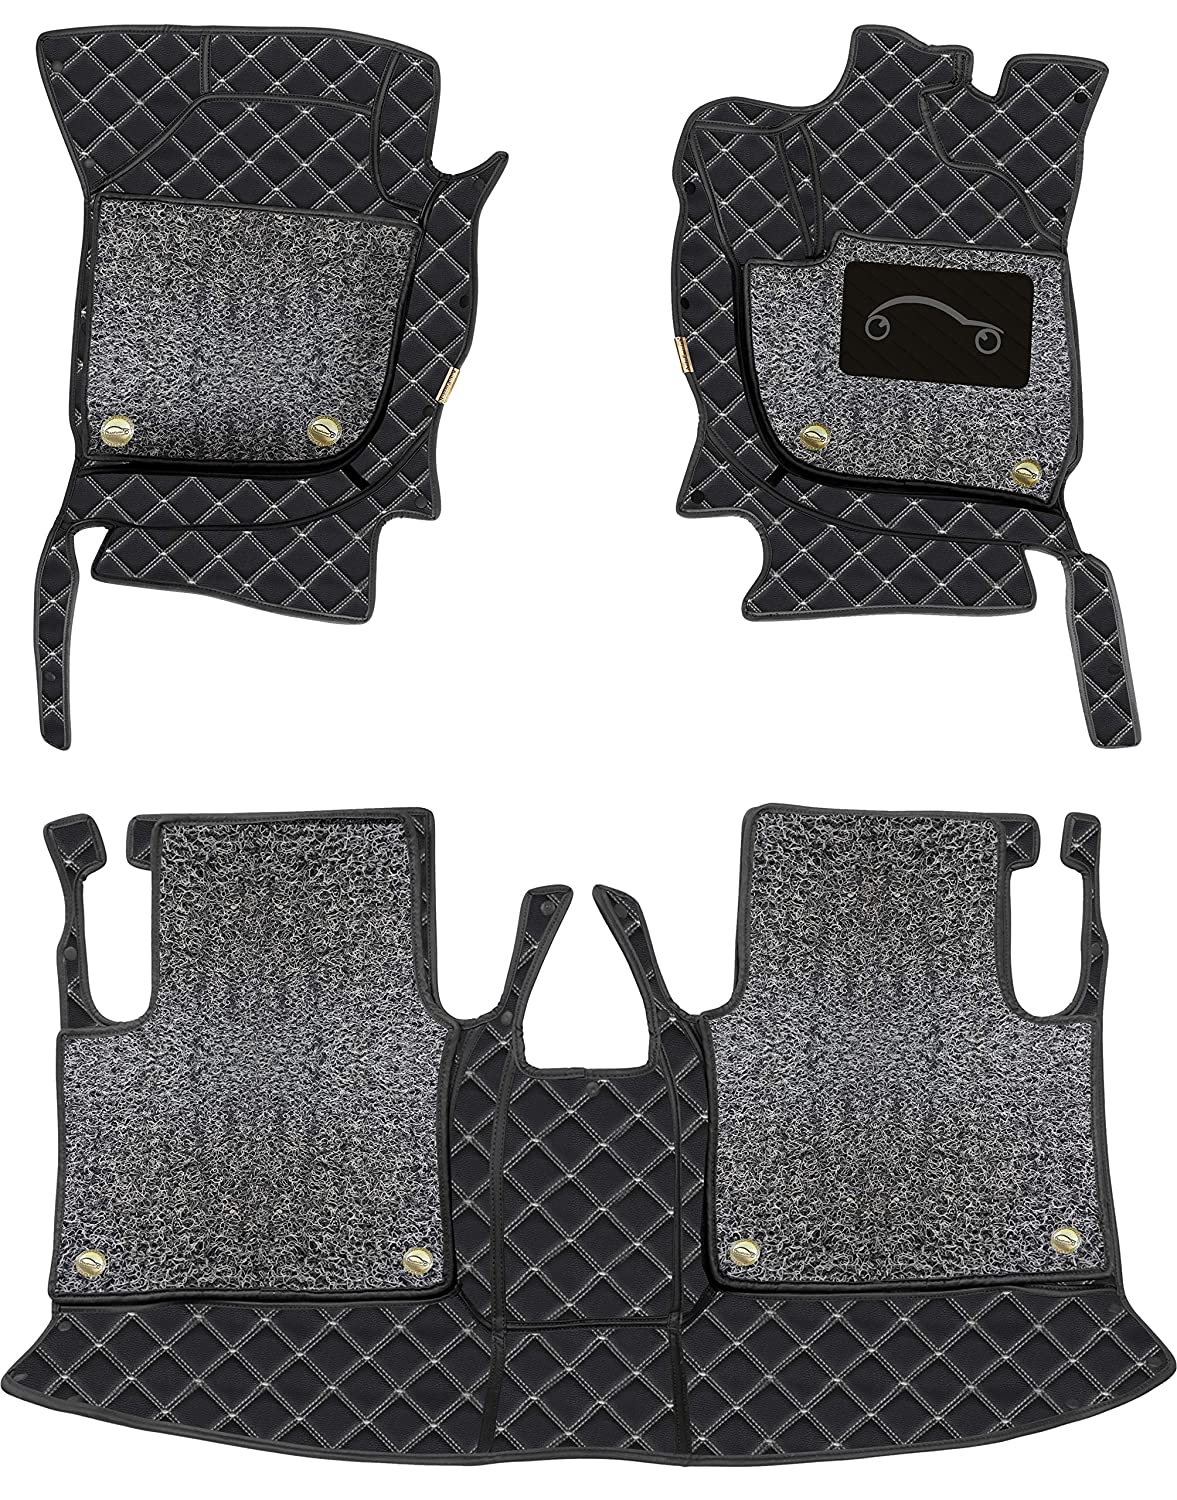 Mercedes GLE 43 AMG 2018 7D Luxury Car Mat, All Weather Proof, Anti-Skid, 100% Waterproof & Odorless with Unique Diamond Fish Design (24mm Luxury PU Leather, 2 Rows)